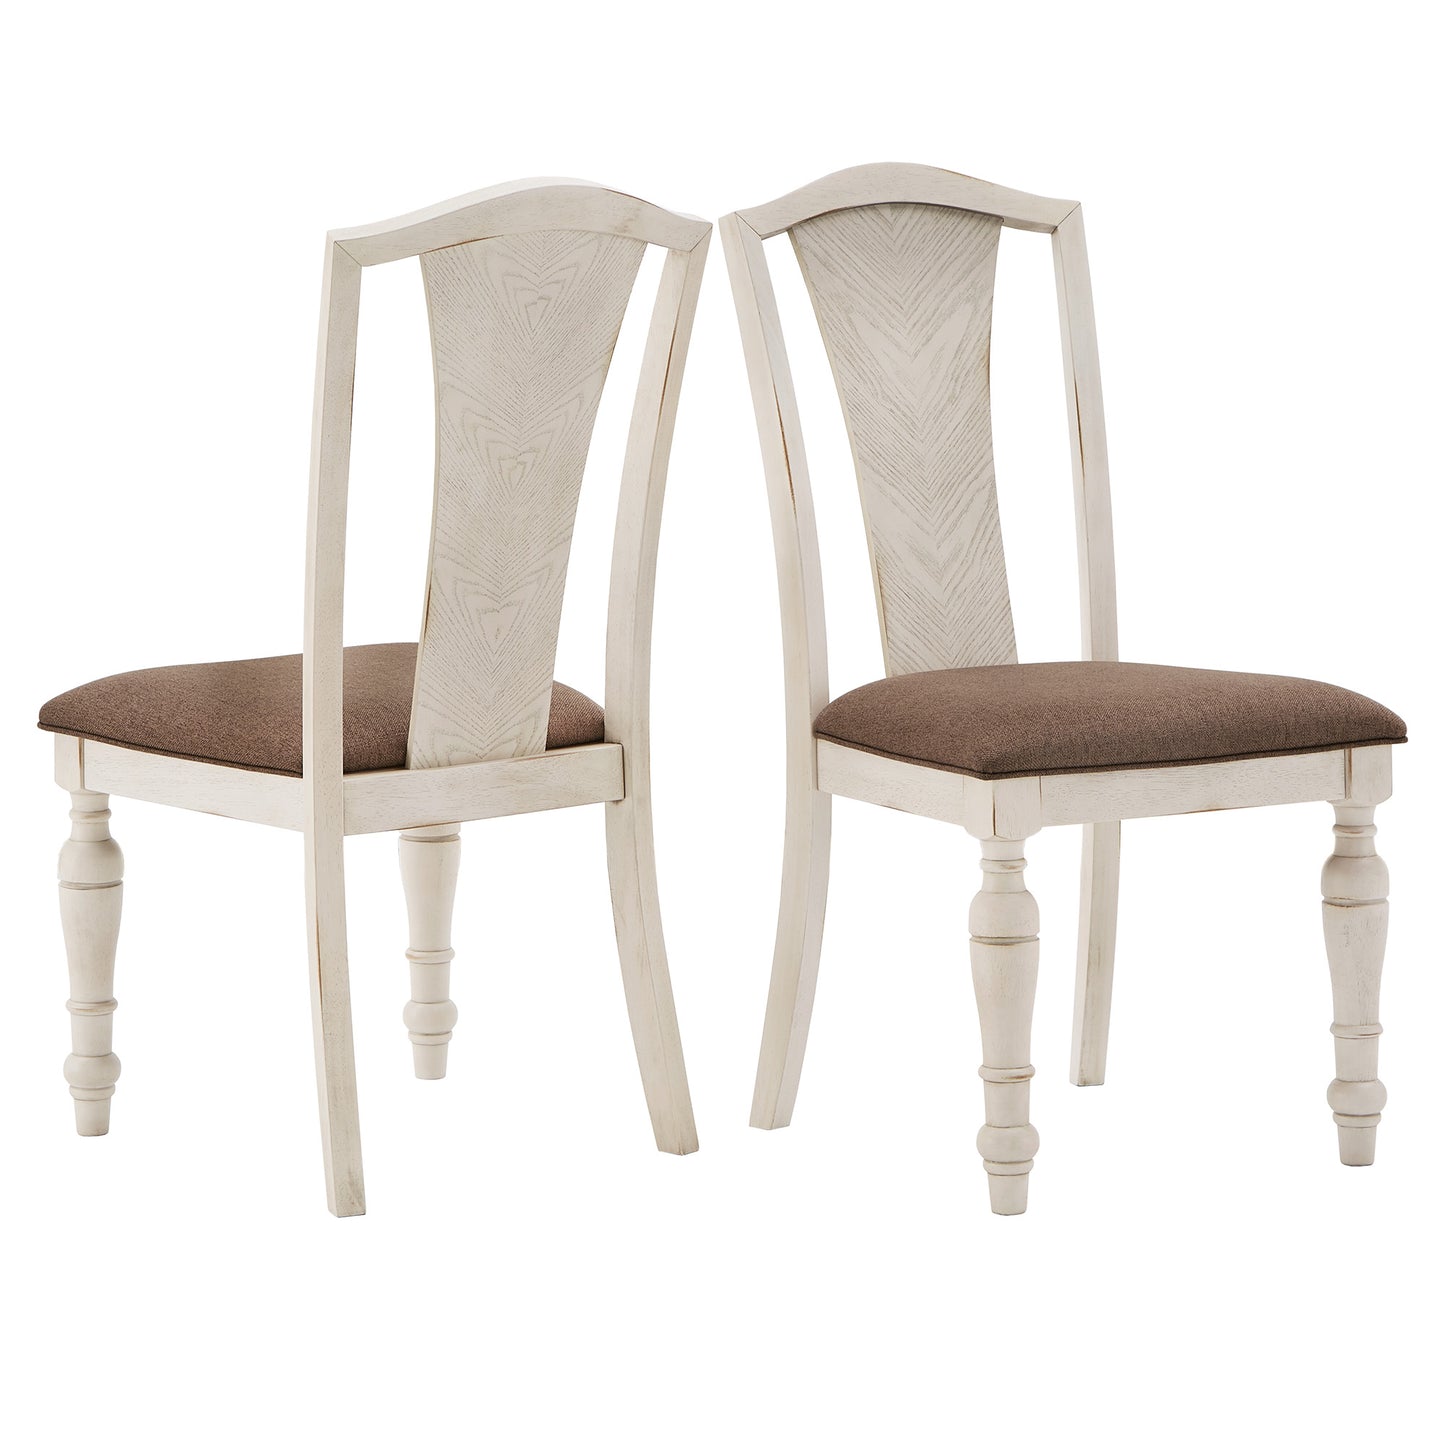 Slat Back Solid Rubberwood Dining Chairs (Set of 2) - Dark Brown Fabric, Antique White Finish